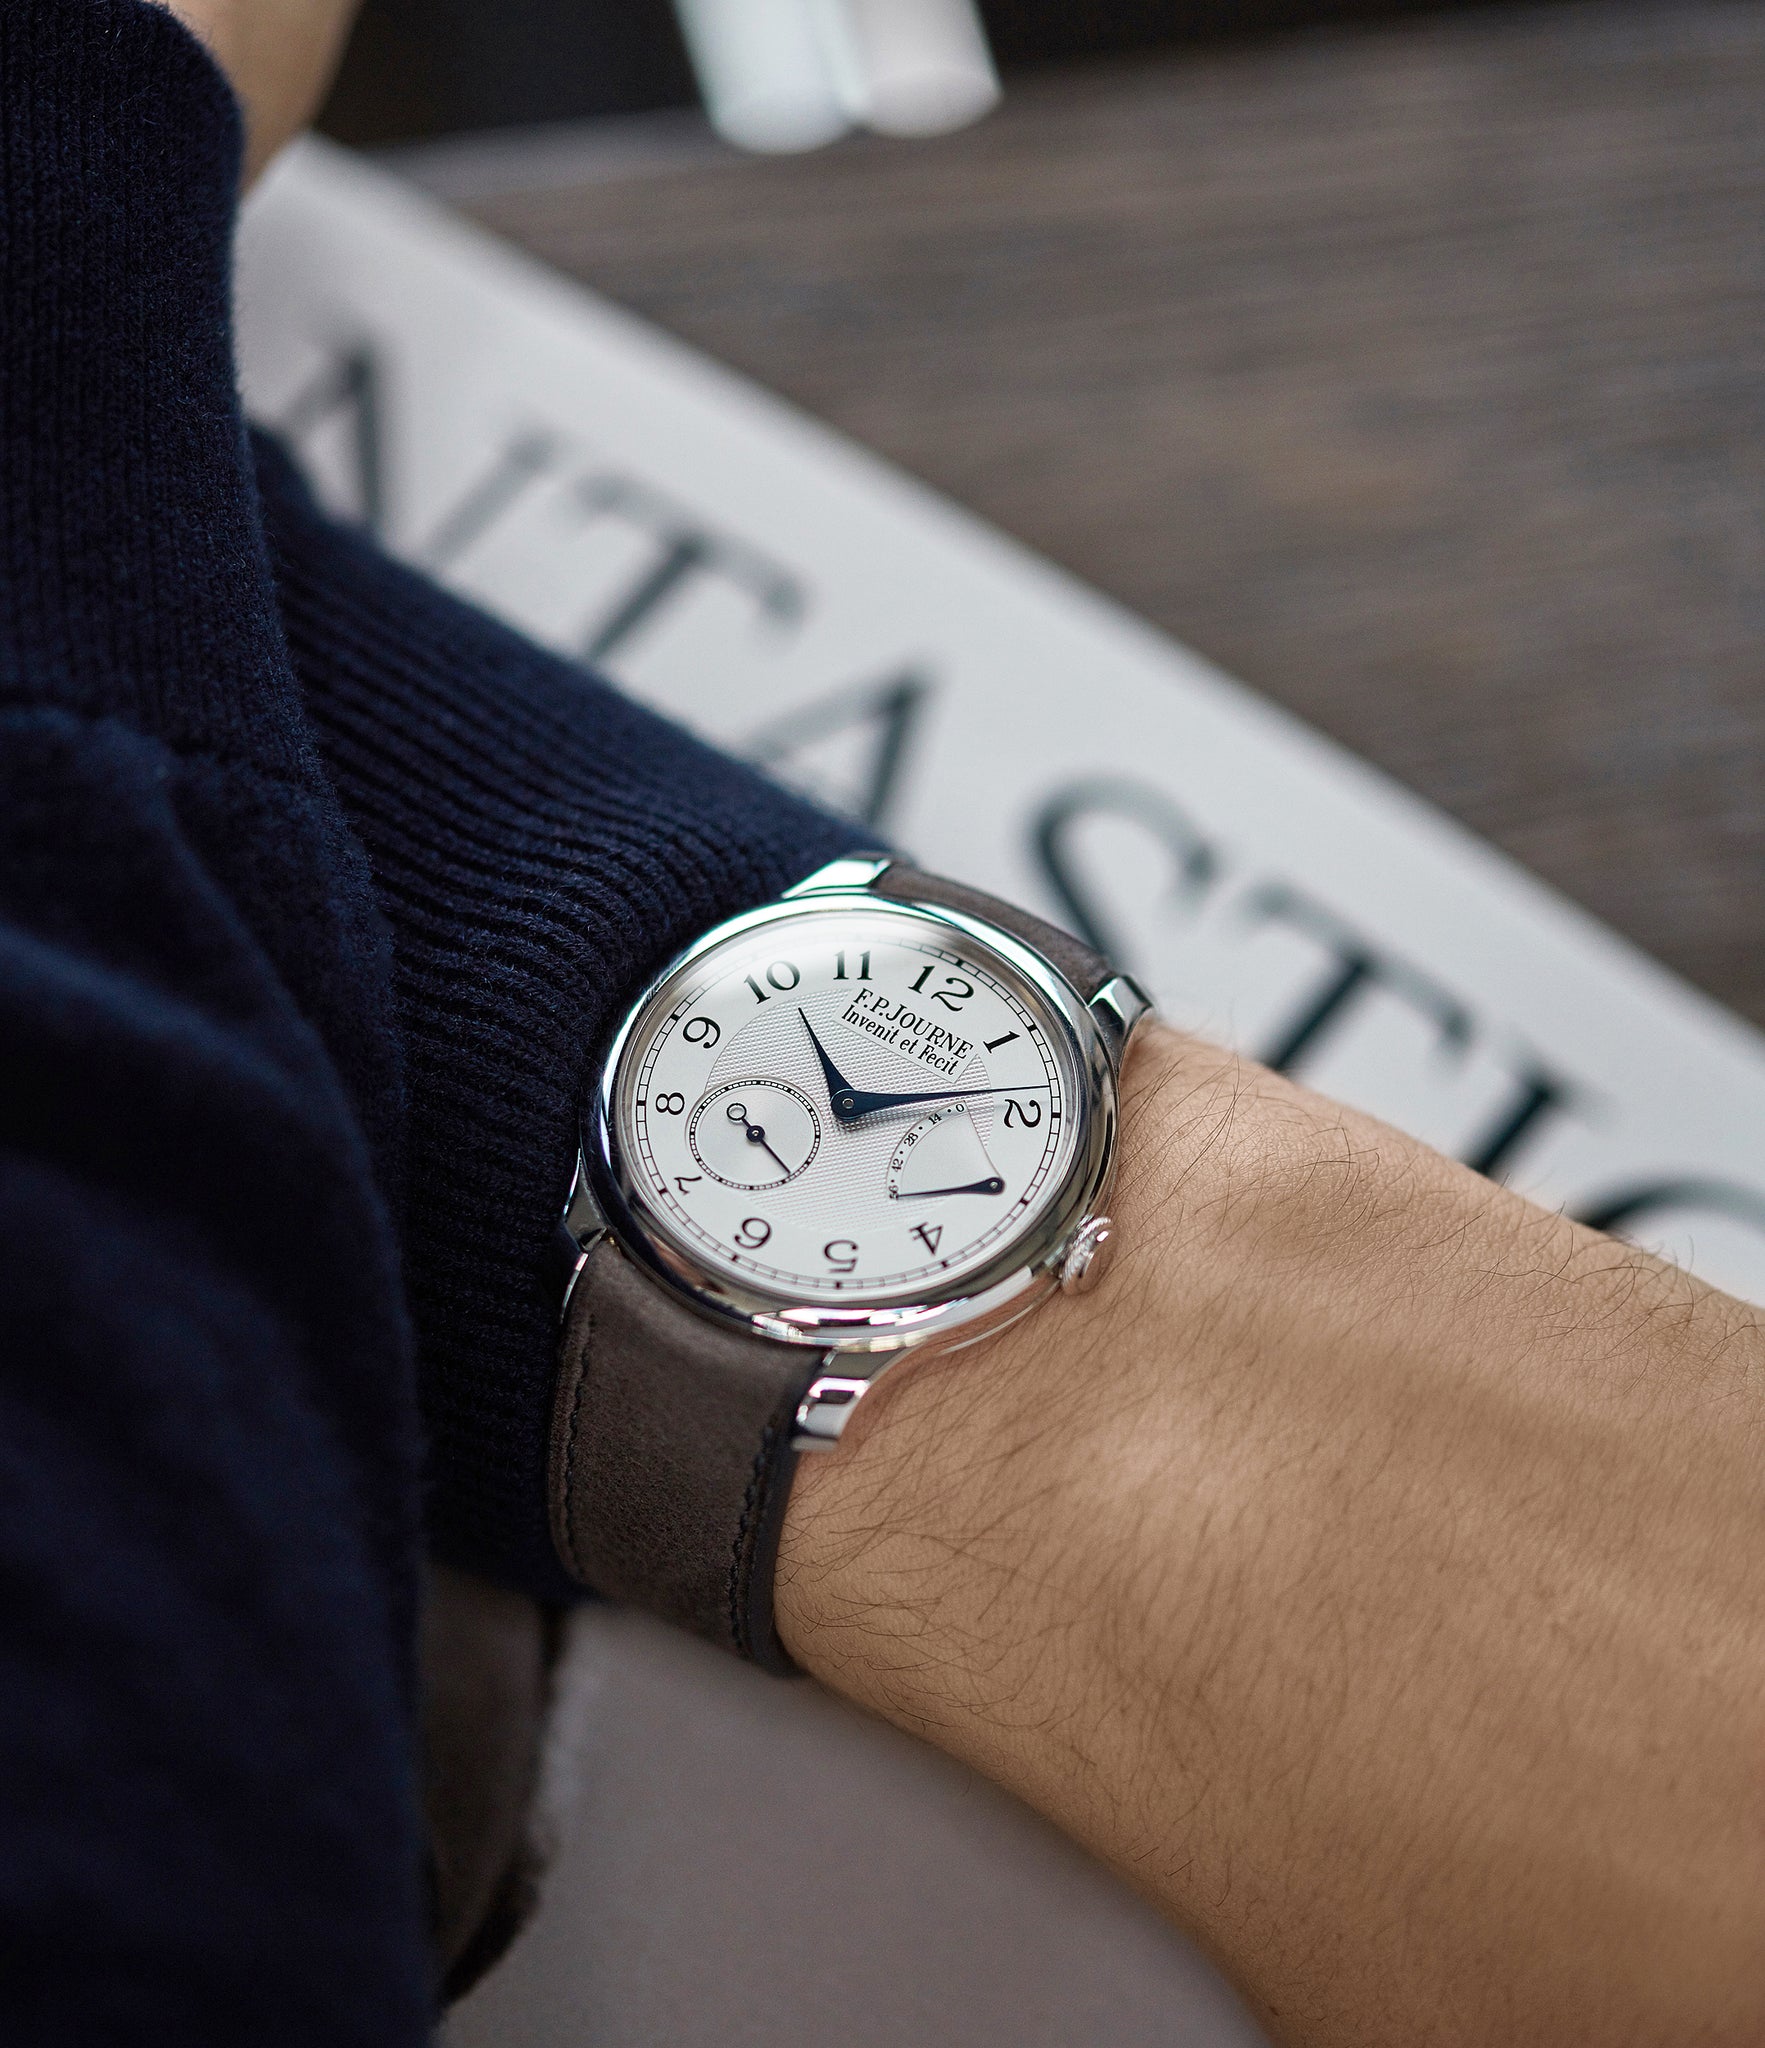 time-only Journe Chronometre Souverain platinum 40mm Cal. 1304 manual-winding silver dial time-only dress watch for sale online at A Collected Man London UK specialist independent watchmakers